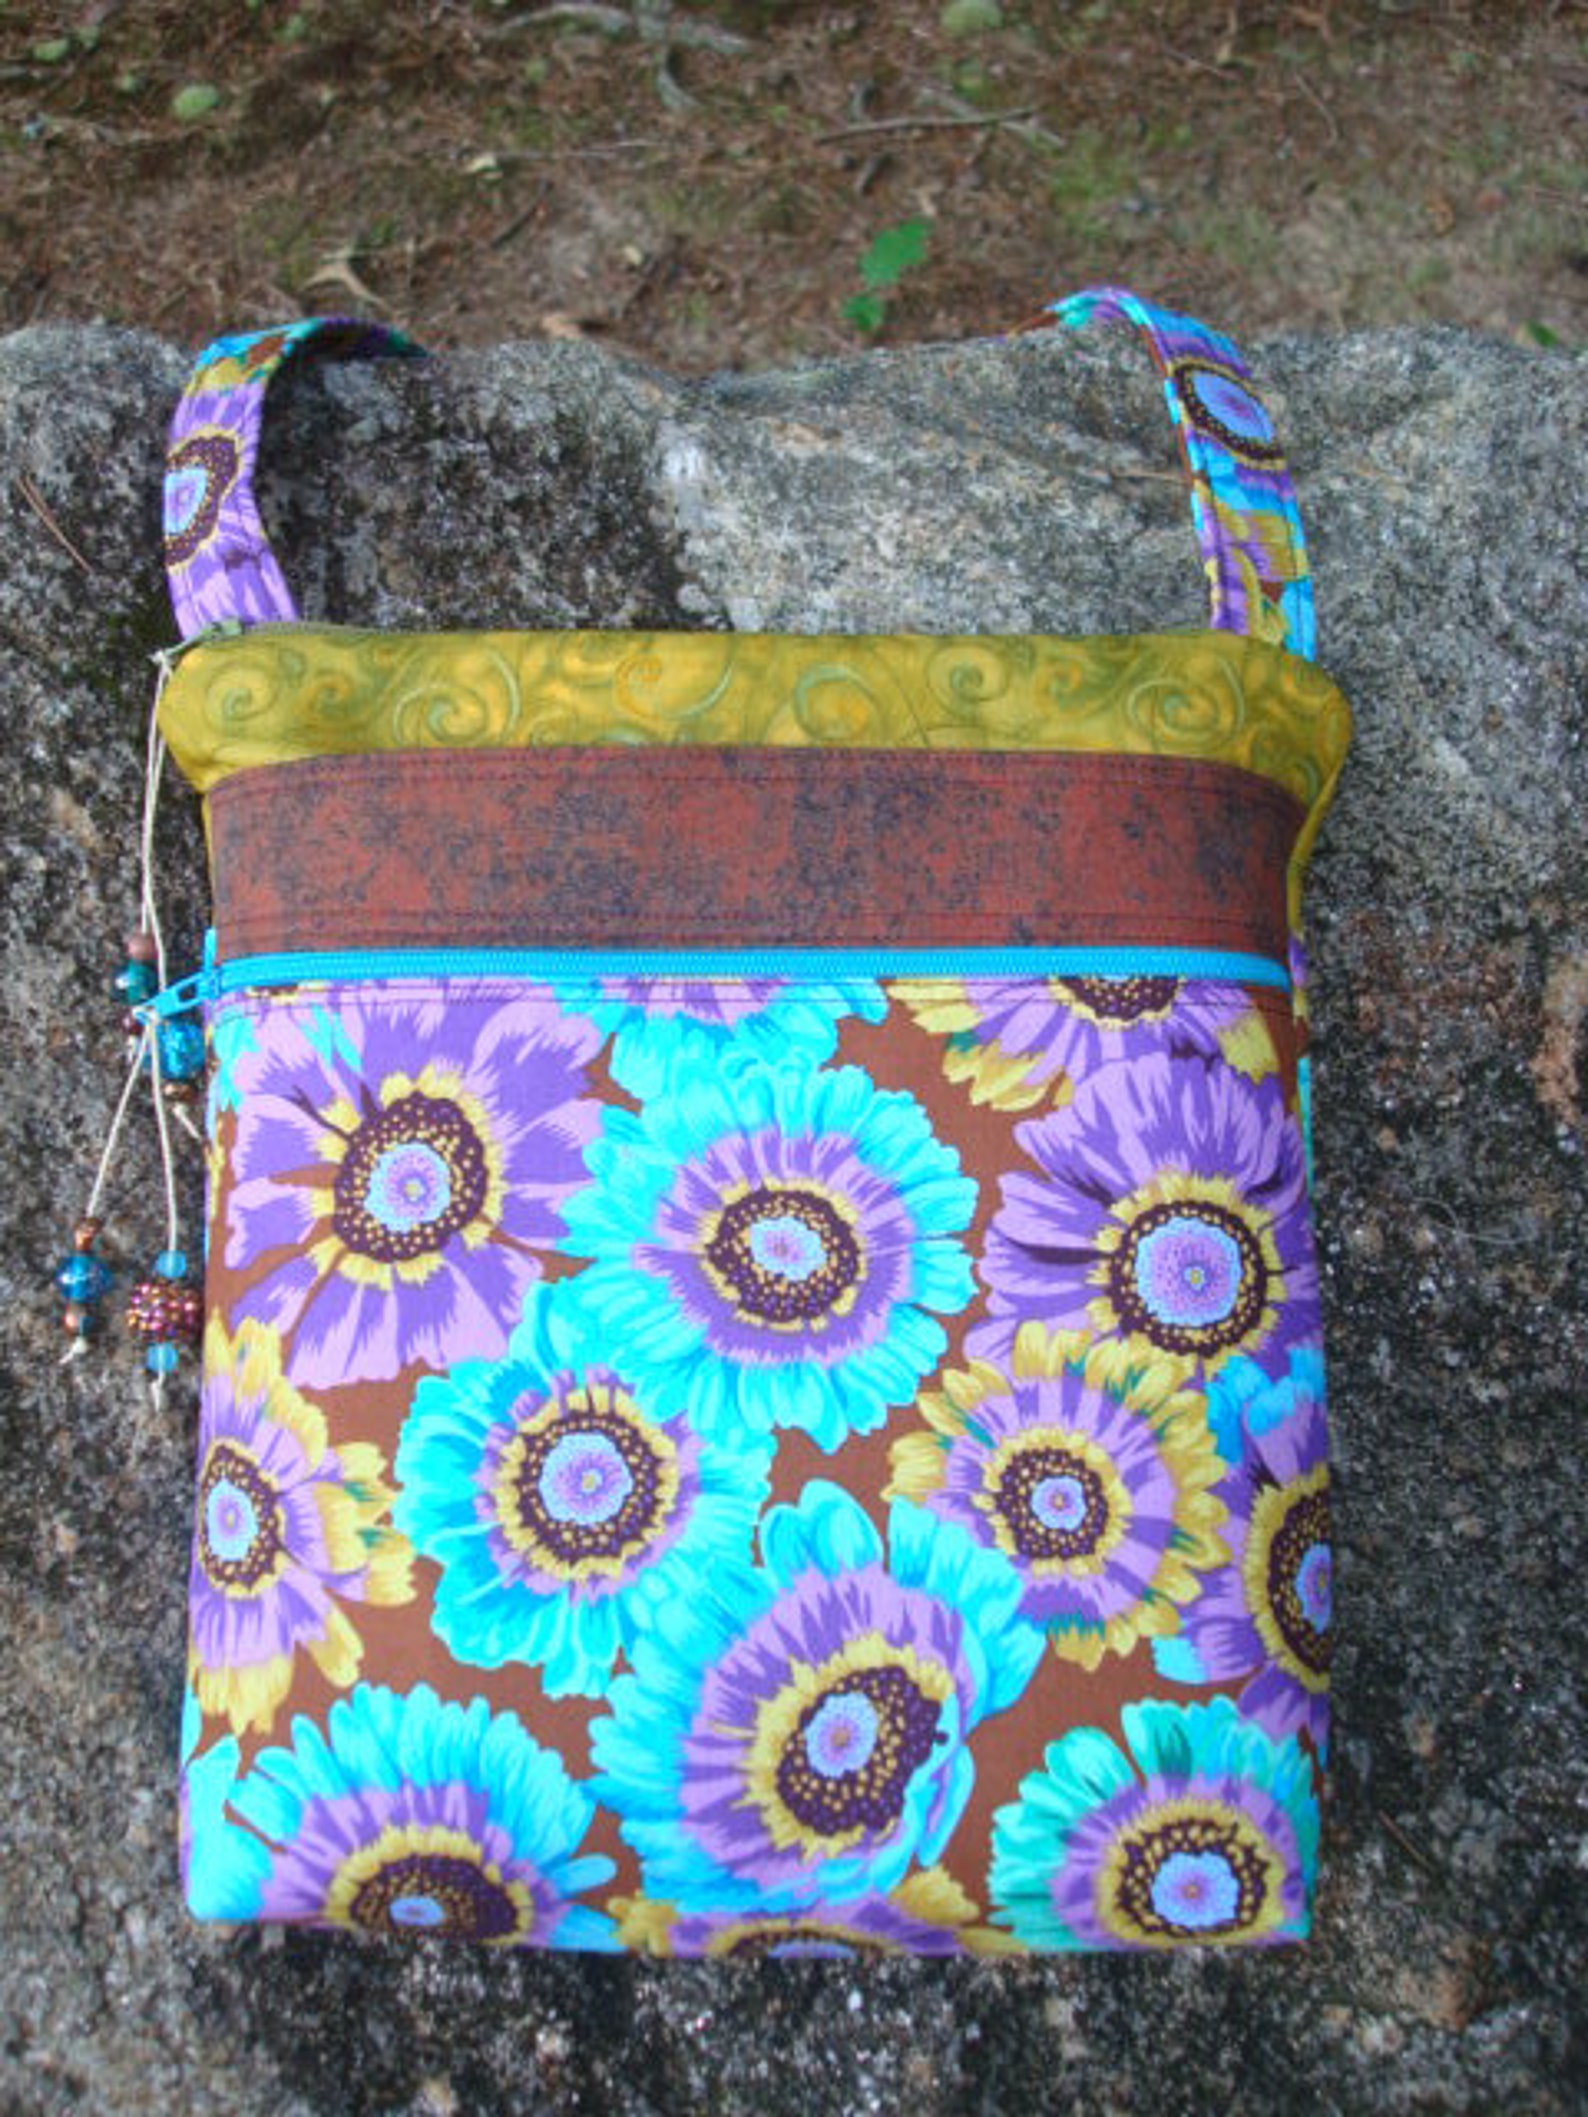 Brown and Blue Floral Cross Body Bag Purse | Etsy